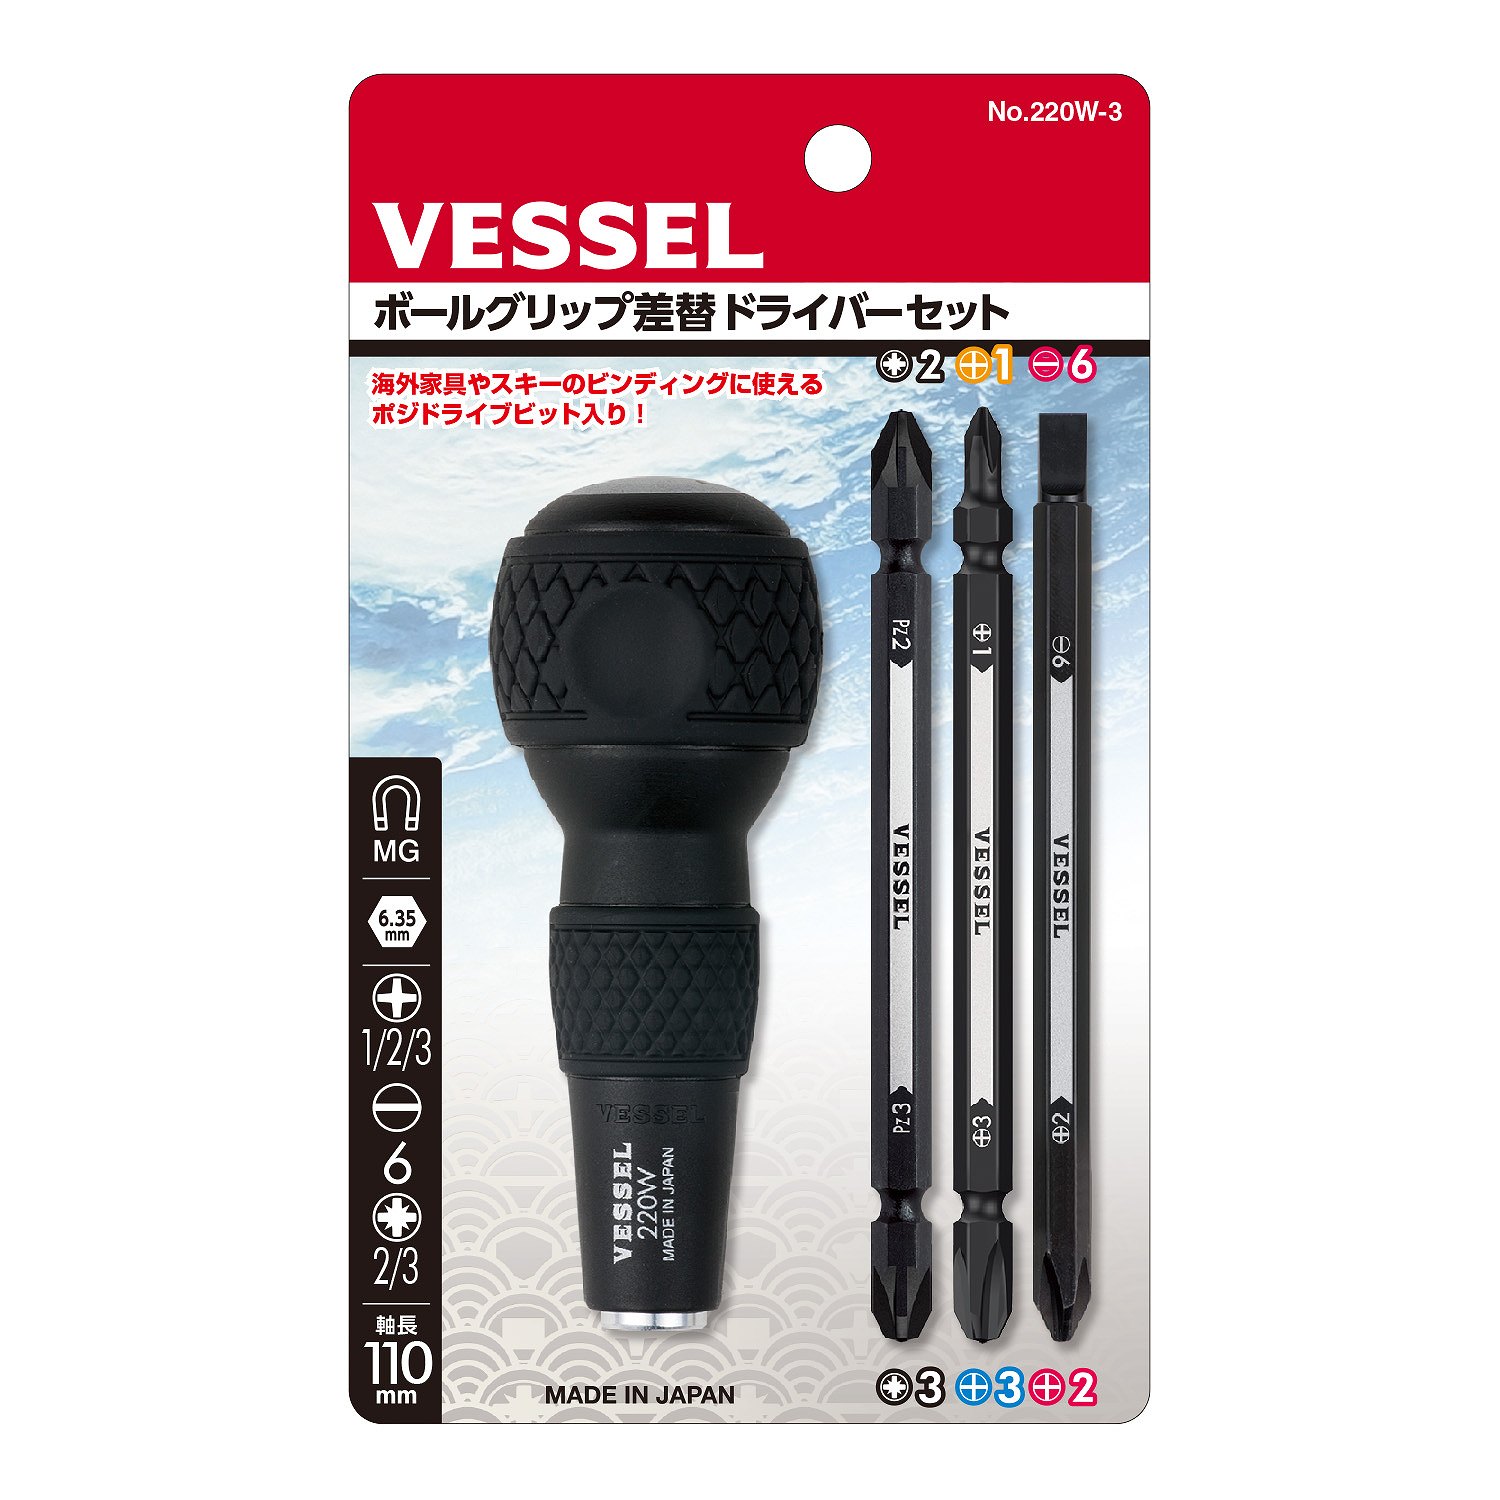 Details about   VESSEL Ball-Grip Interchangeable Screwdriver Set No.220W-3 Free shipping 